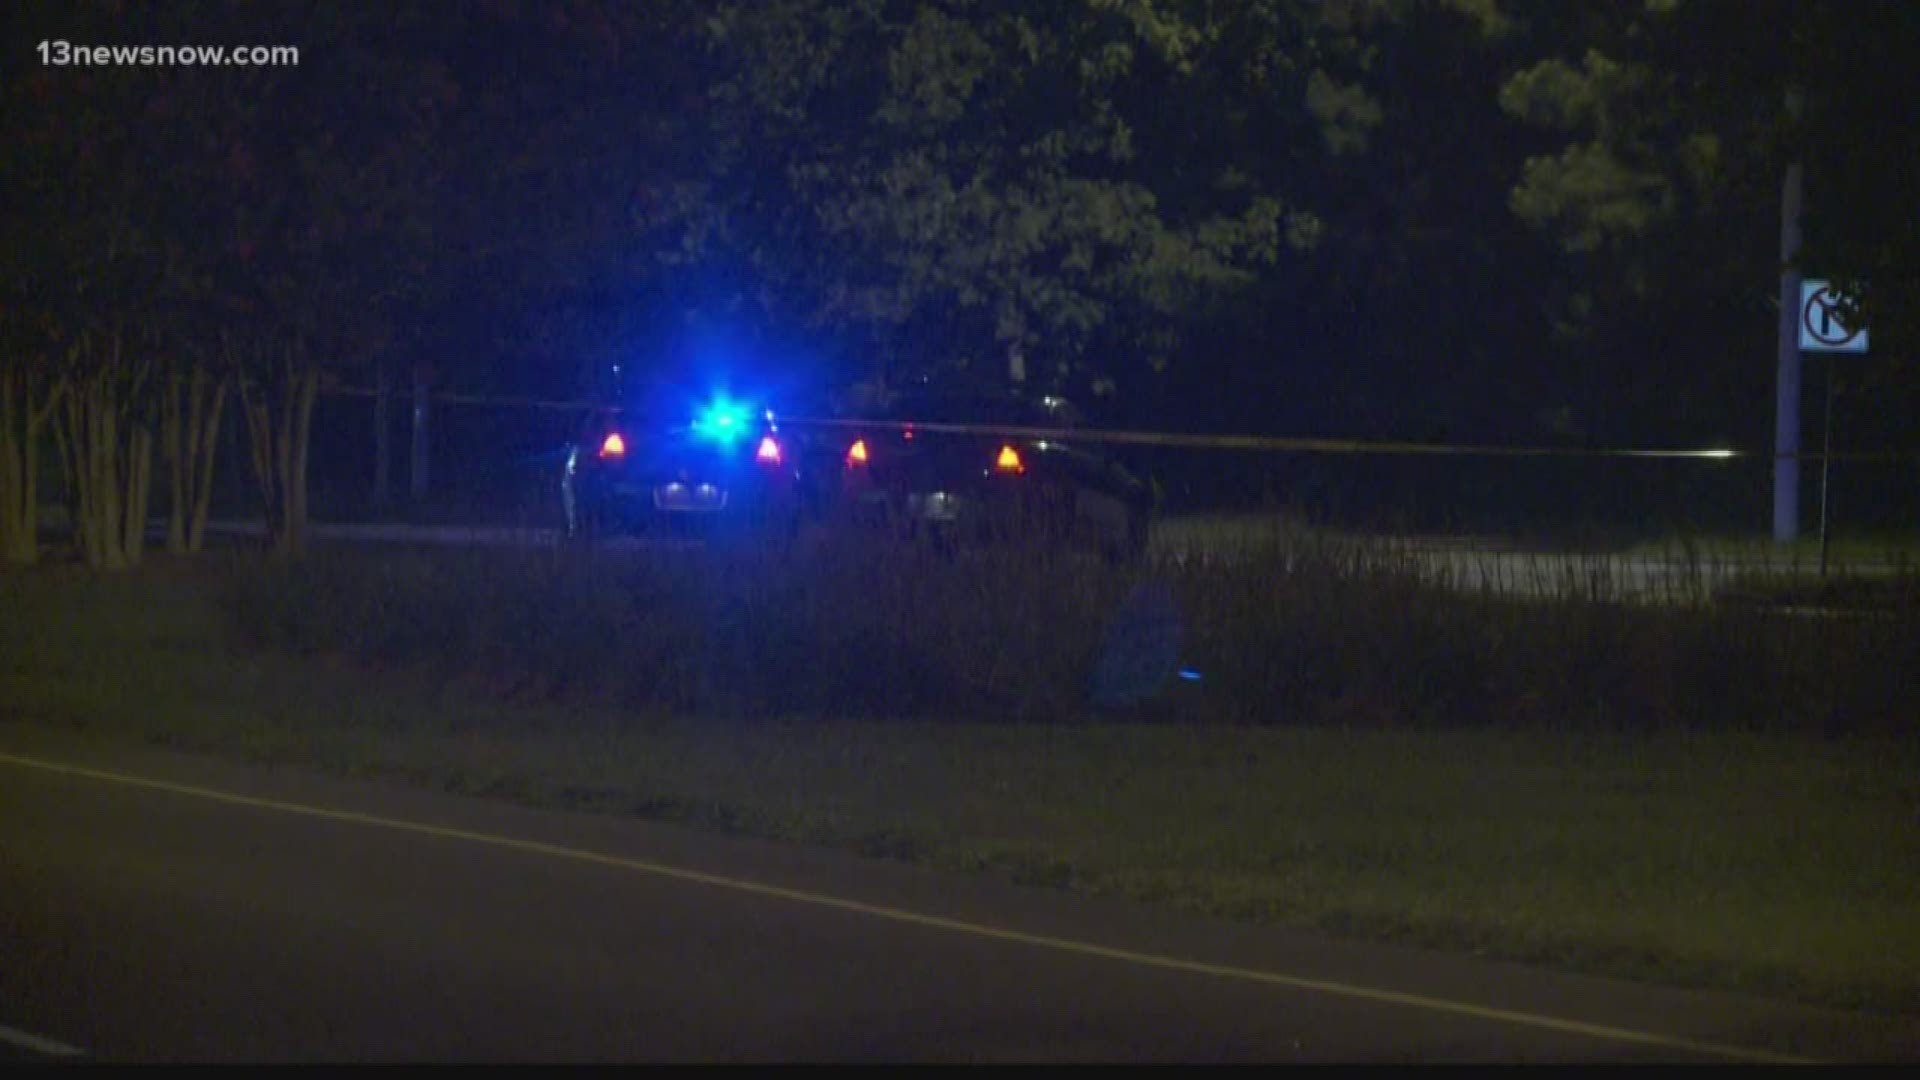 Police believe two vehicles had been street racing right before a double fatal crash late Thursday night.